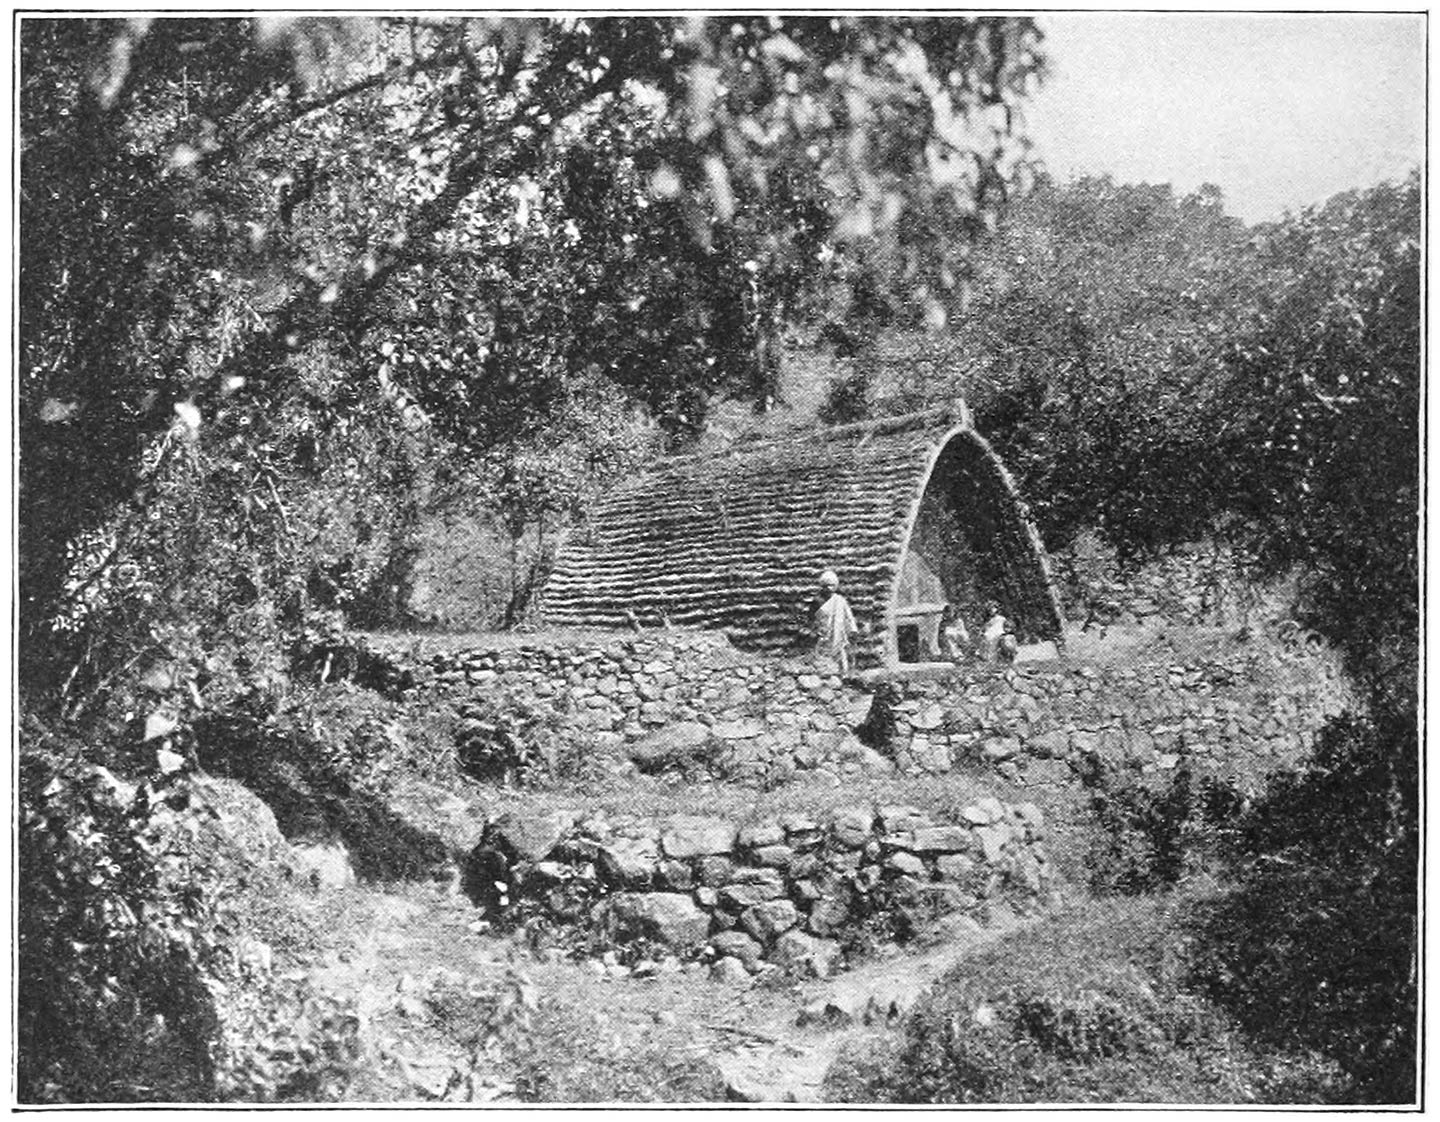 FIG. 7.—THE CHIEF HOUSE OF THE VILLAGE OF KIUDR.